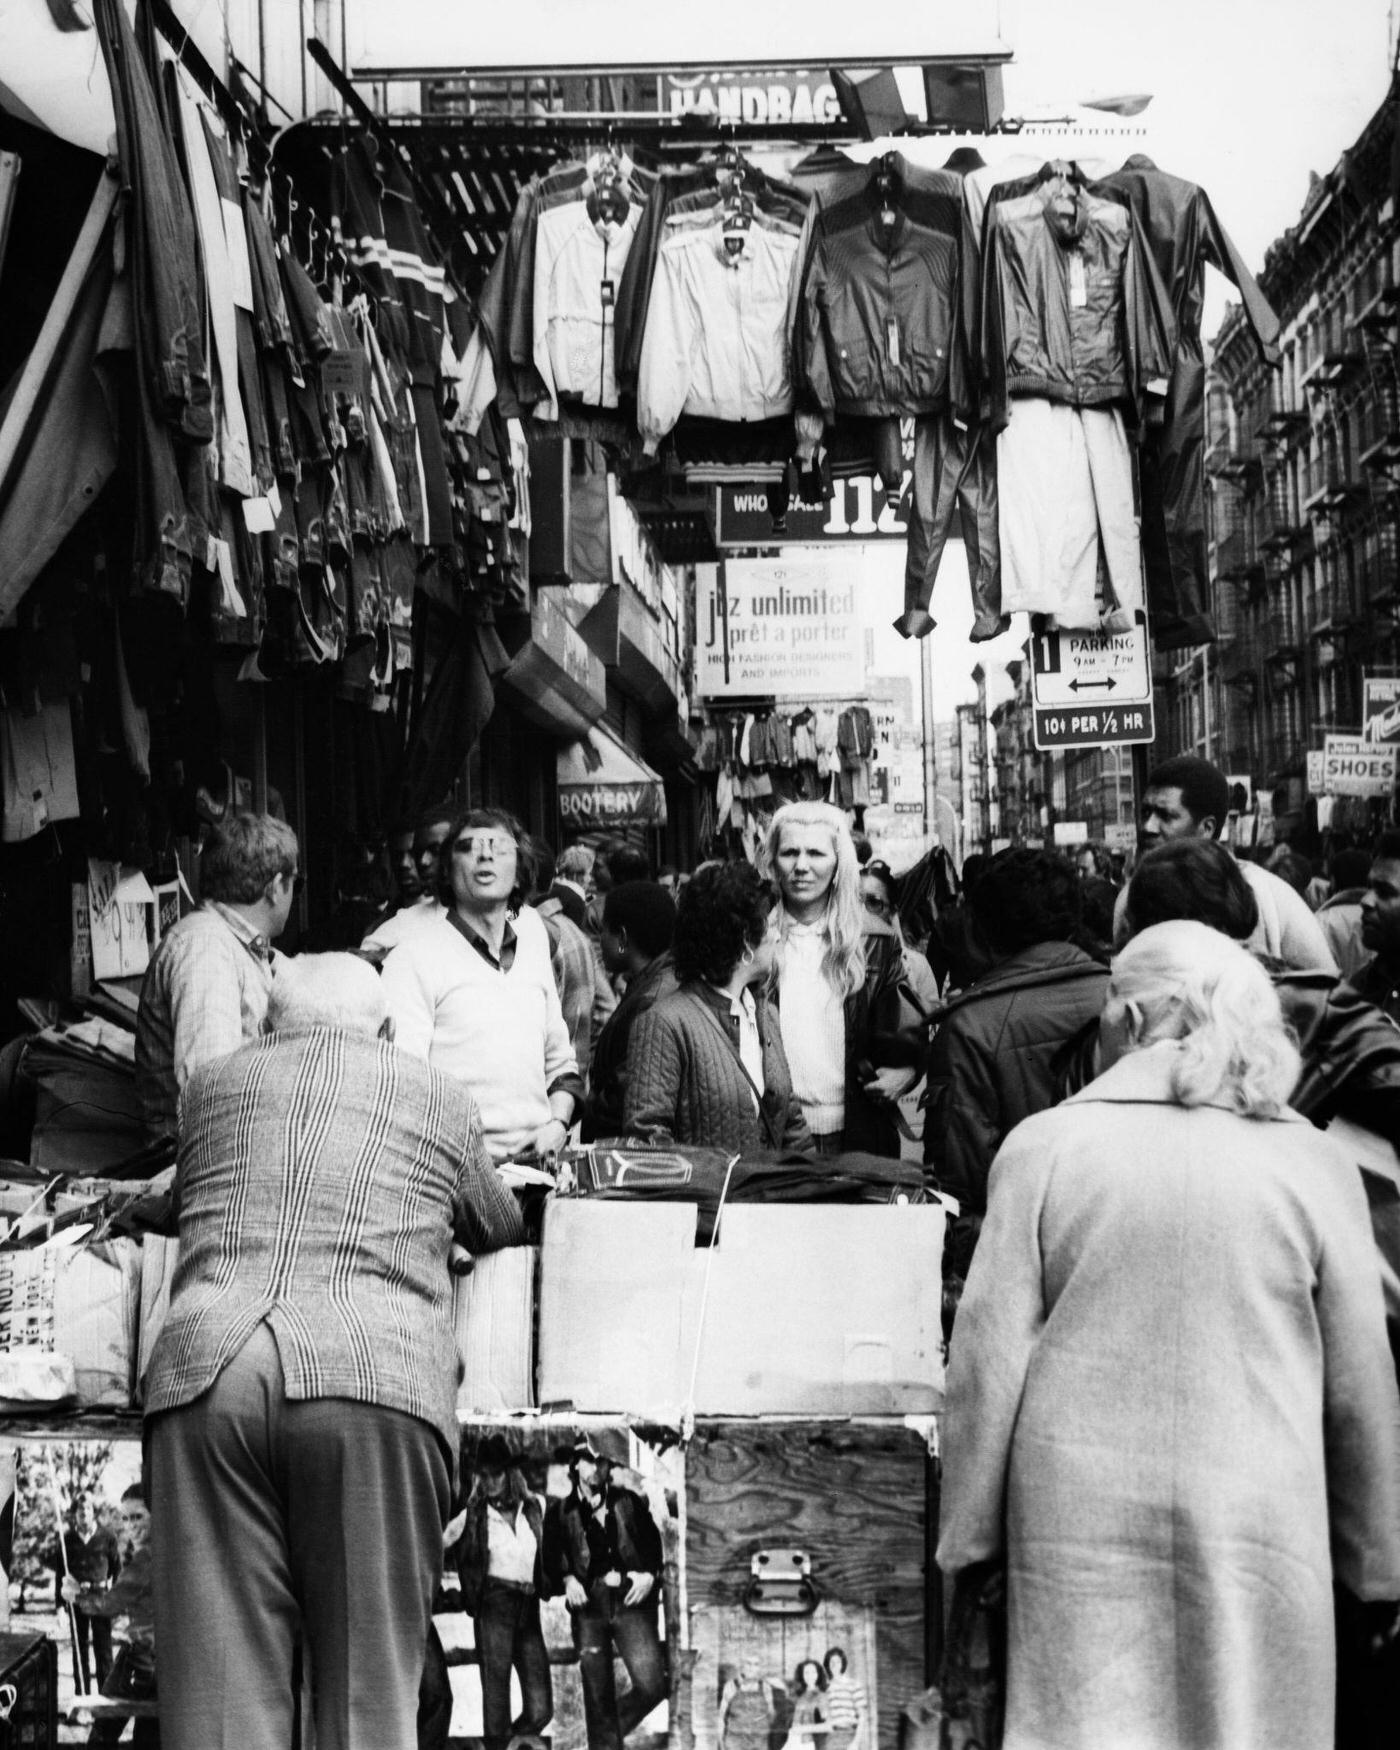 Small Crowd At Clothing Stall, Orchard Street, Lower East Side, Manhattan, 1981